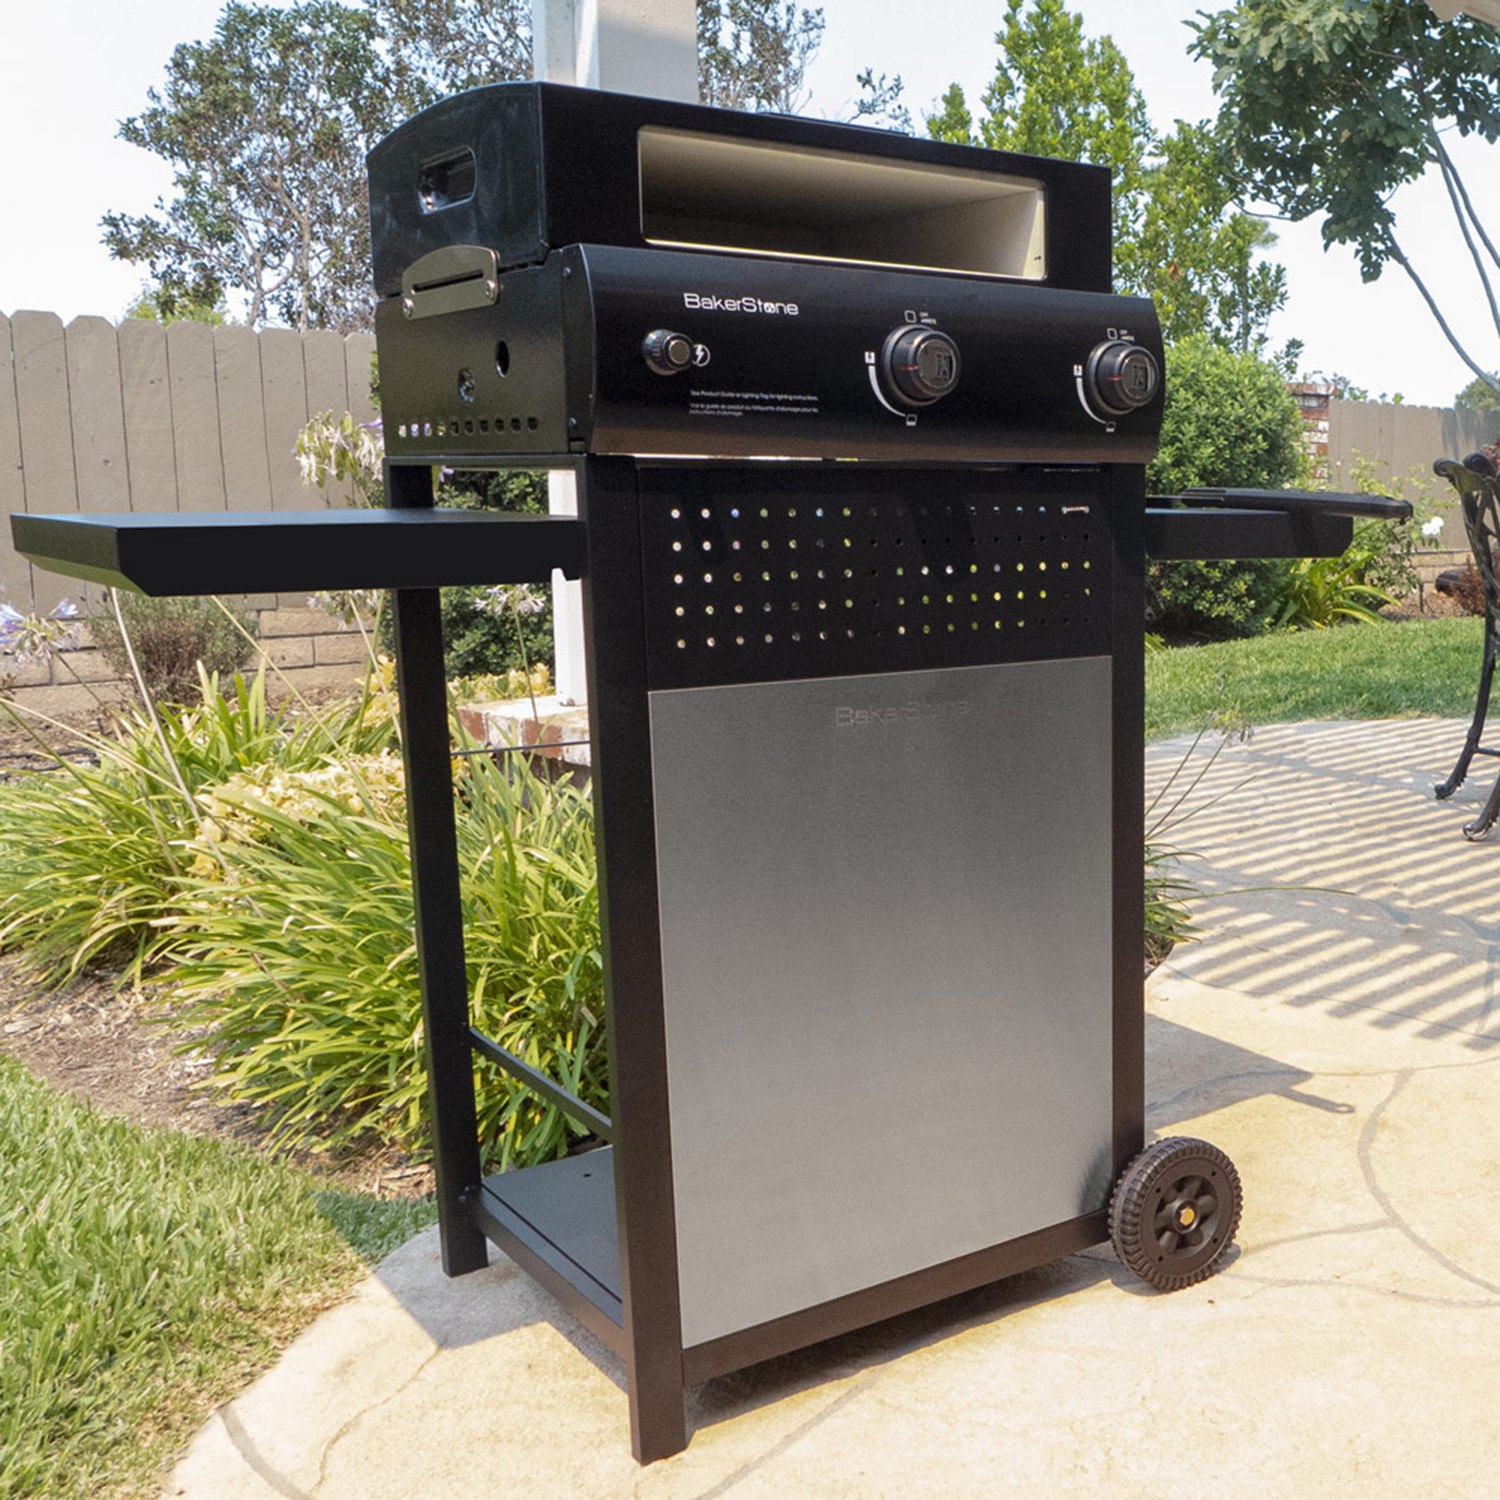 Full Standing Gas Multi Function Oven, Bakerstone Outdoor Lp Gas Multi Function Cooking Center